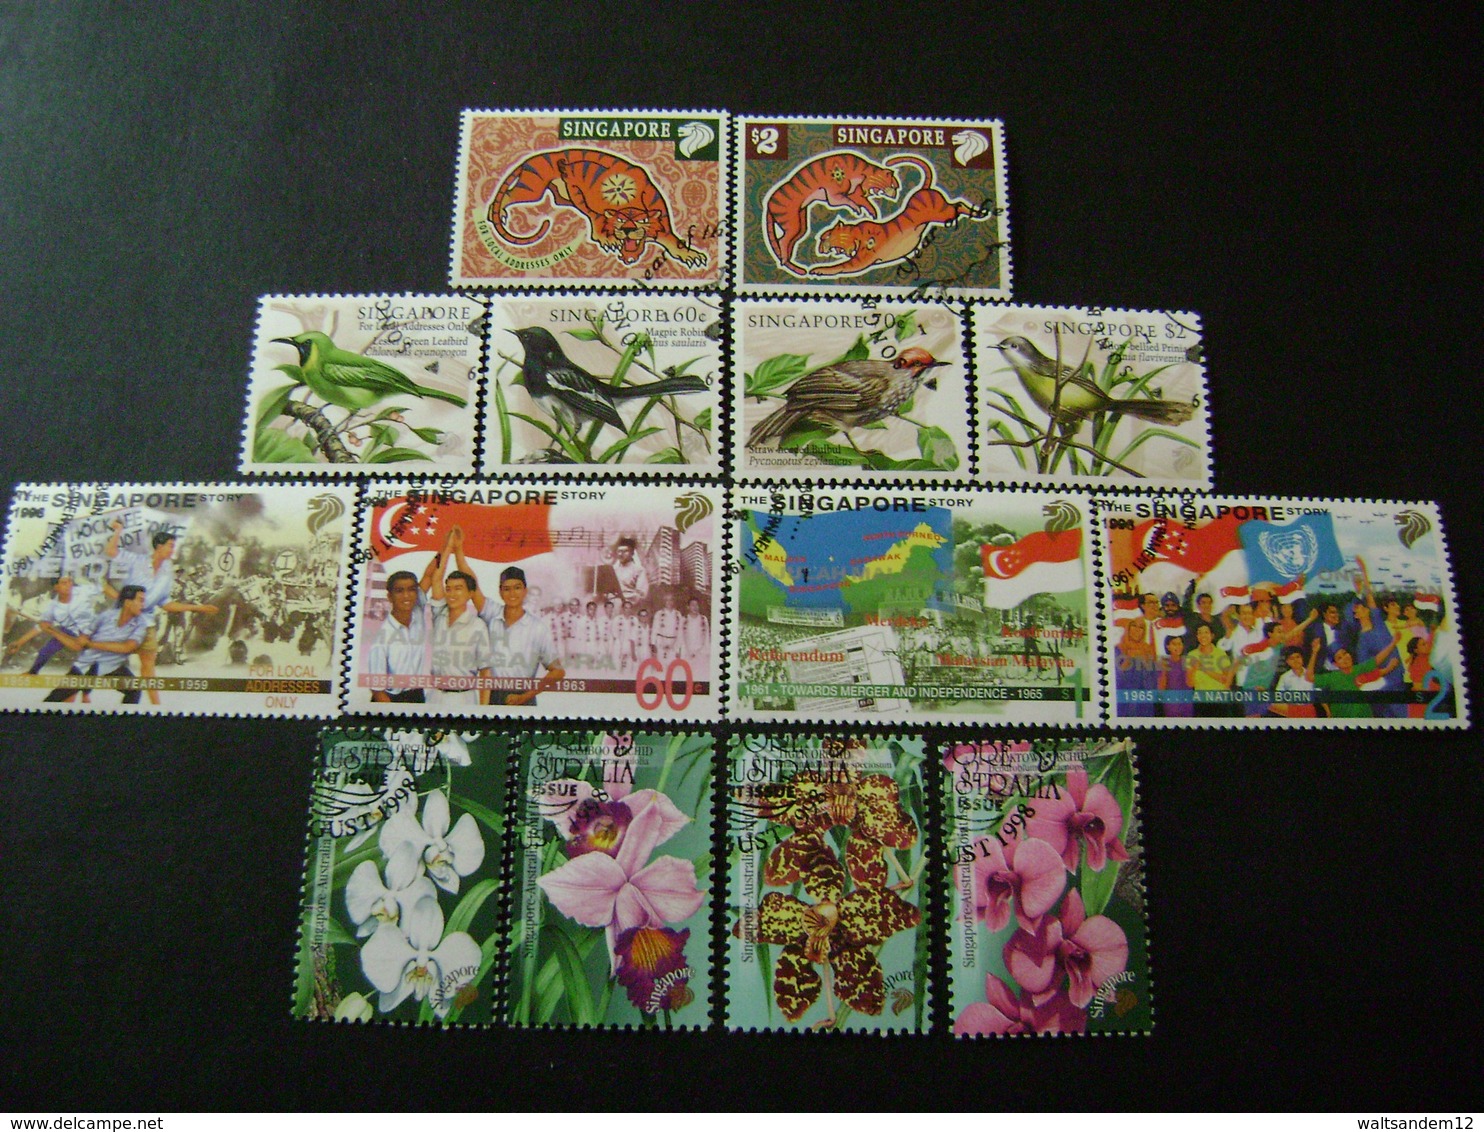 Singapore 1998 Commemorative/special Issues (SG 914-915,919-922,939-942,944-947,949-956,958-965,971-974) 2 Images - Used - Singapore (1959-...)